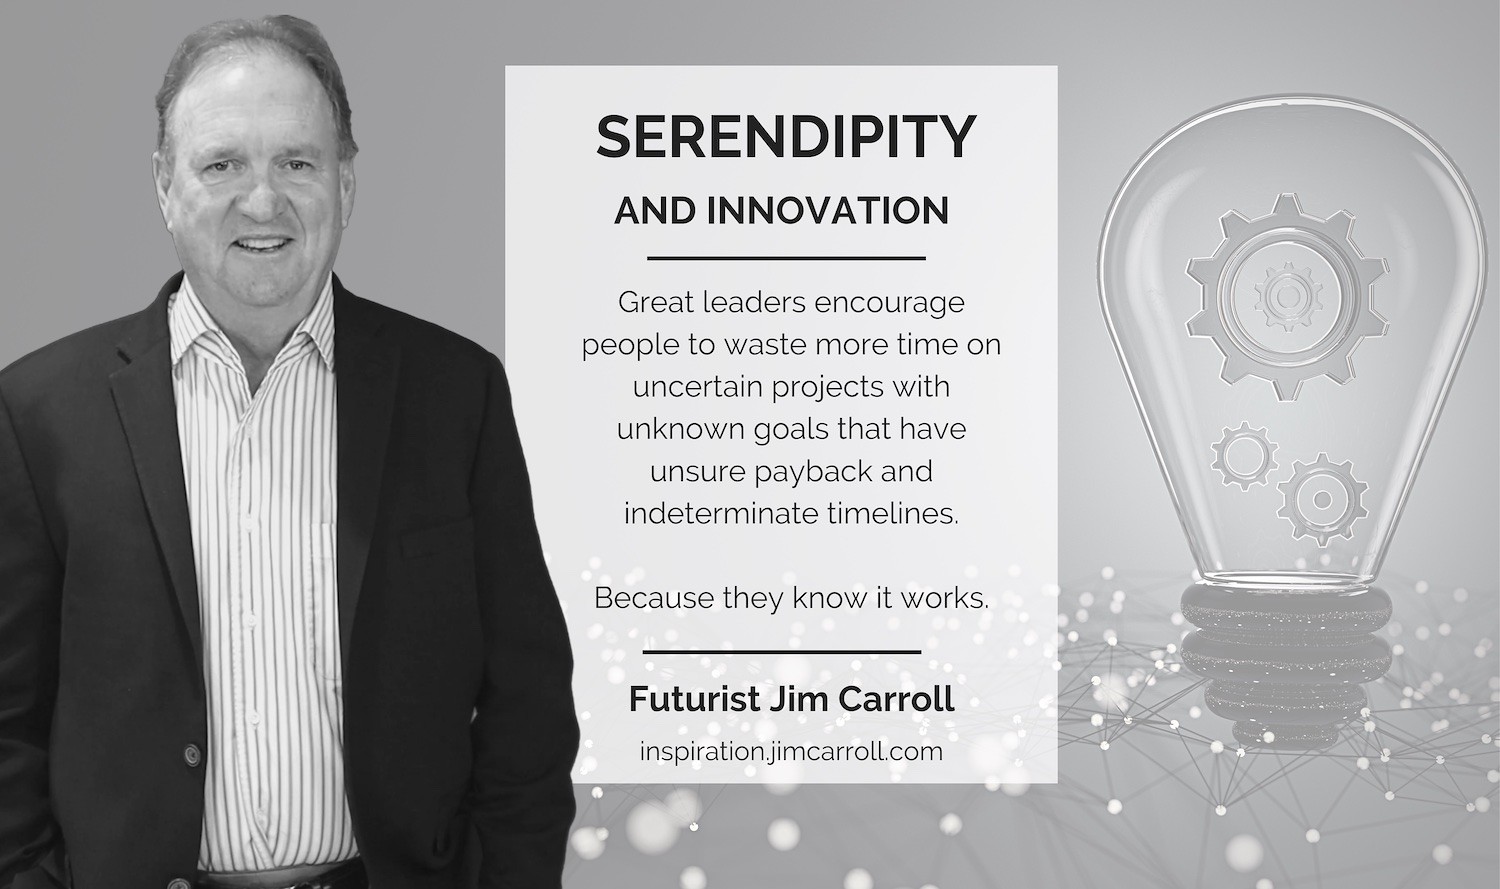 Ser"Great leaders encourage people to waste more time on uncertain projects with unknown goals that have unsure payback and indeterminate timelines. (Because they know it works.)" - Futurist Jim Carroll